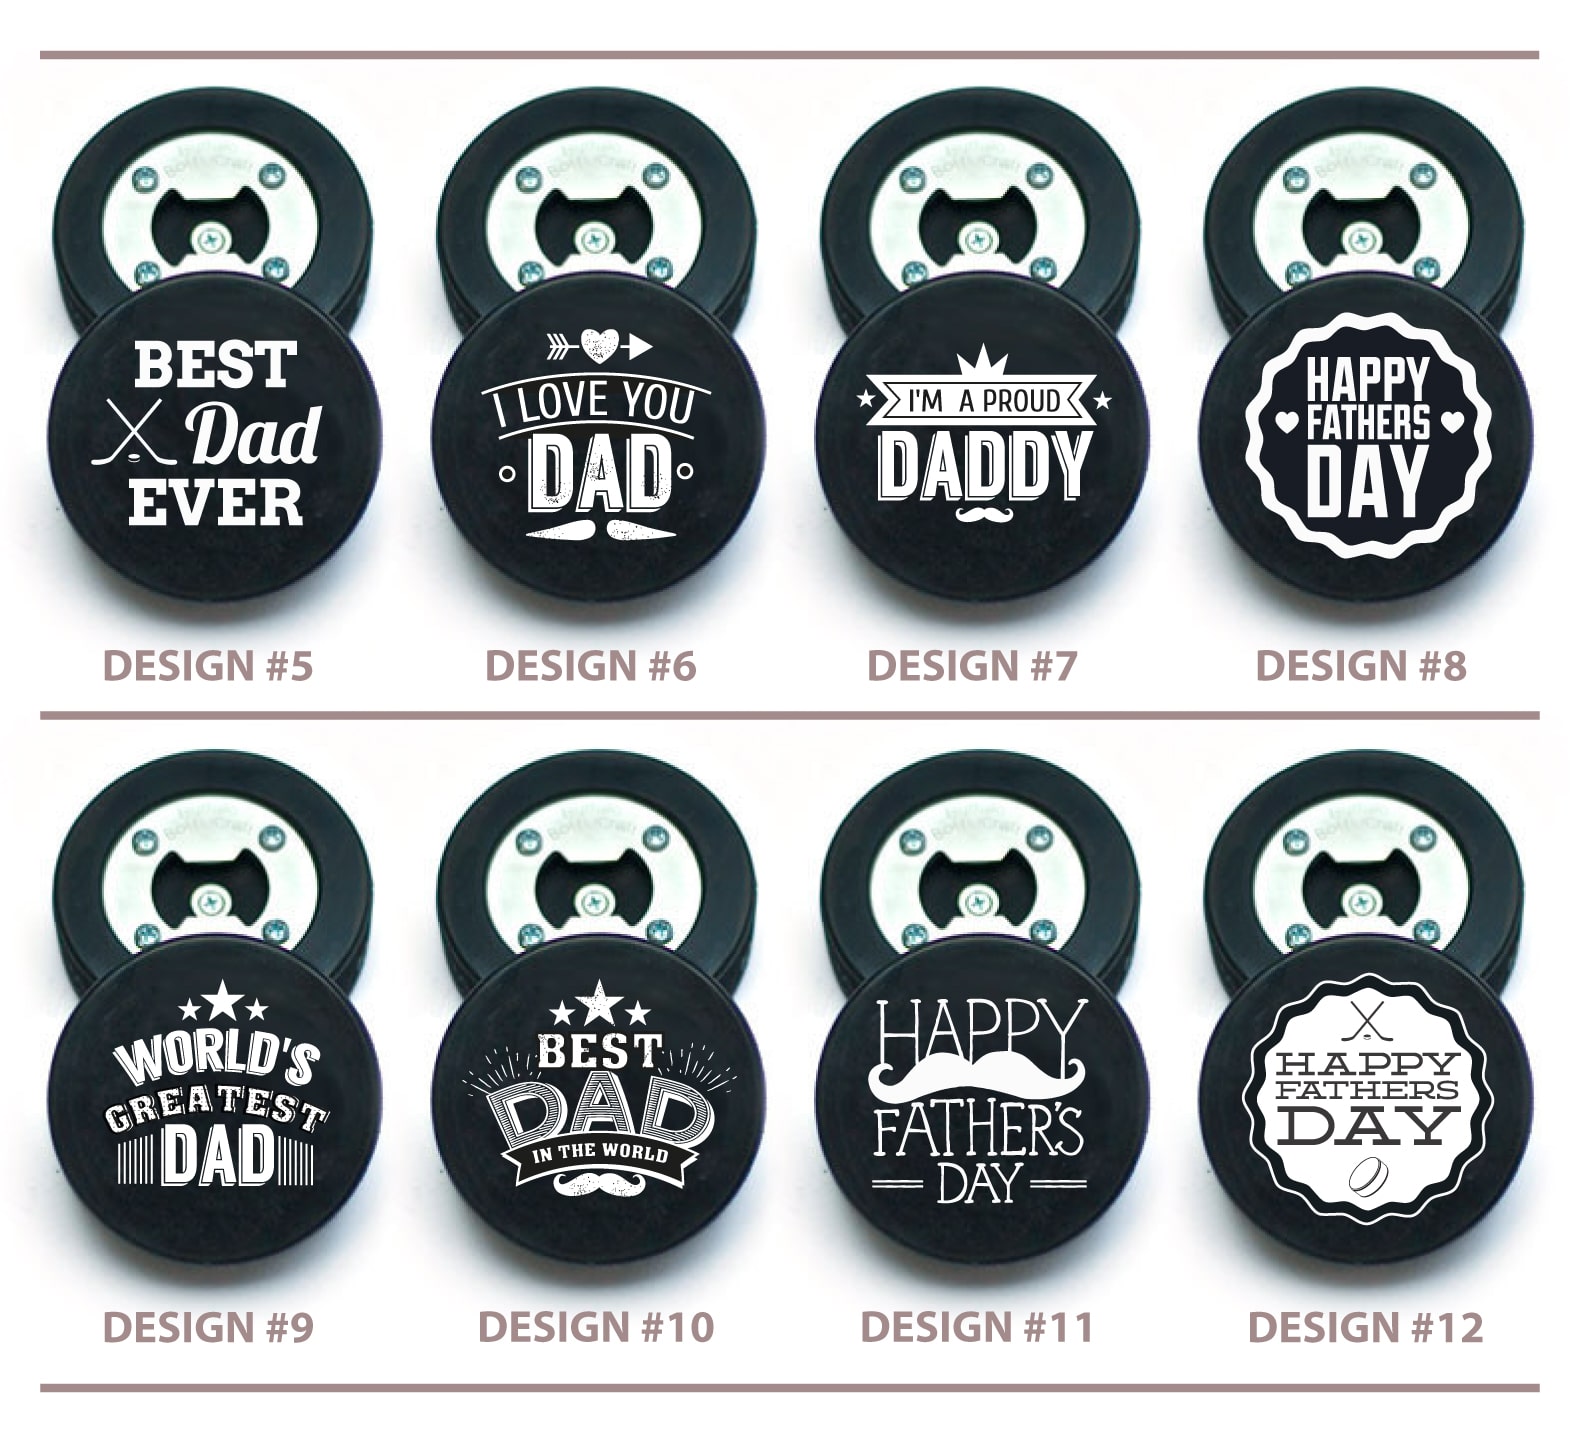 Select from one of these 8 dad-themed puck designs